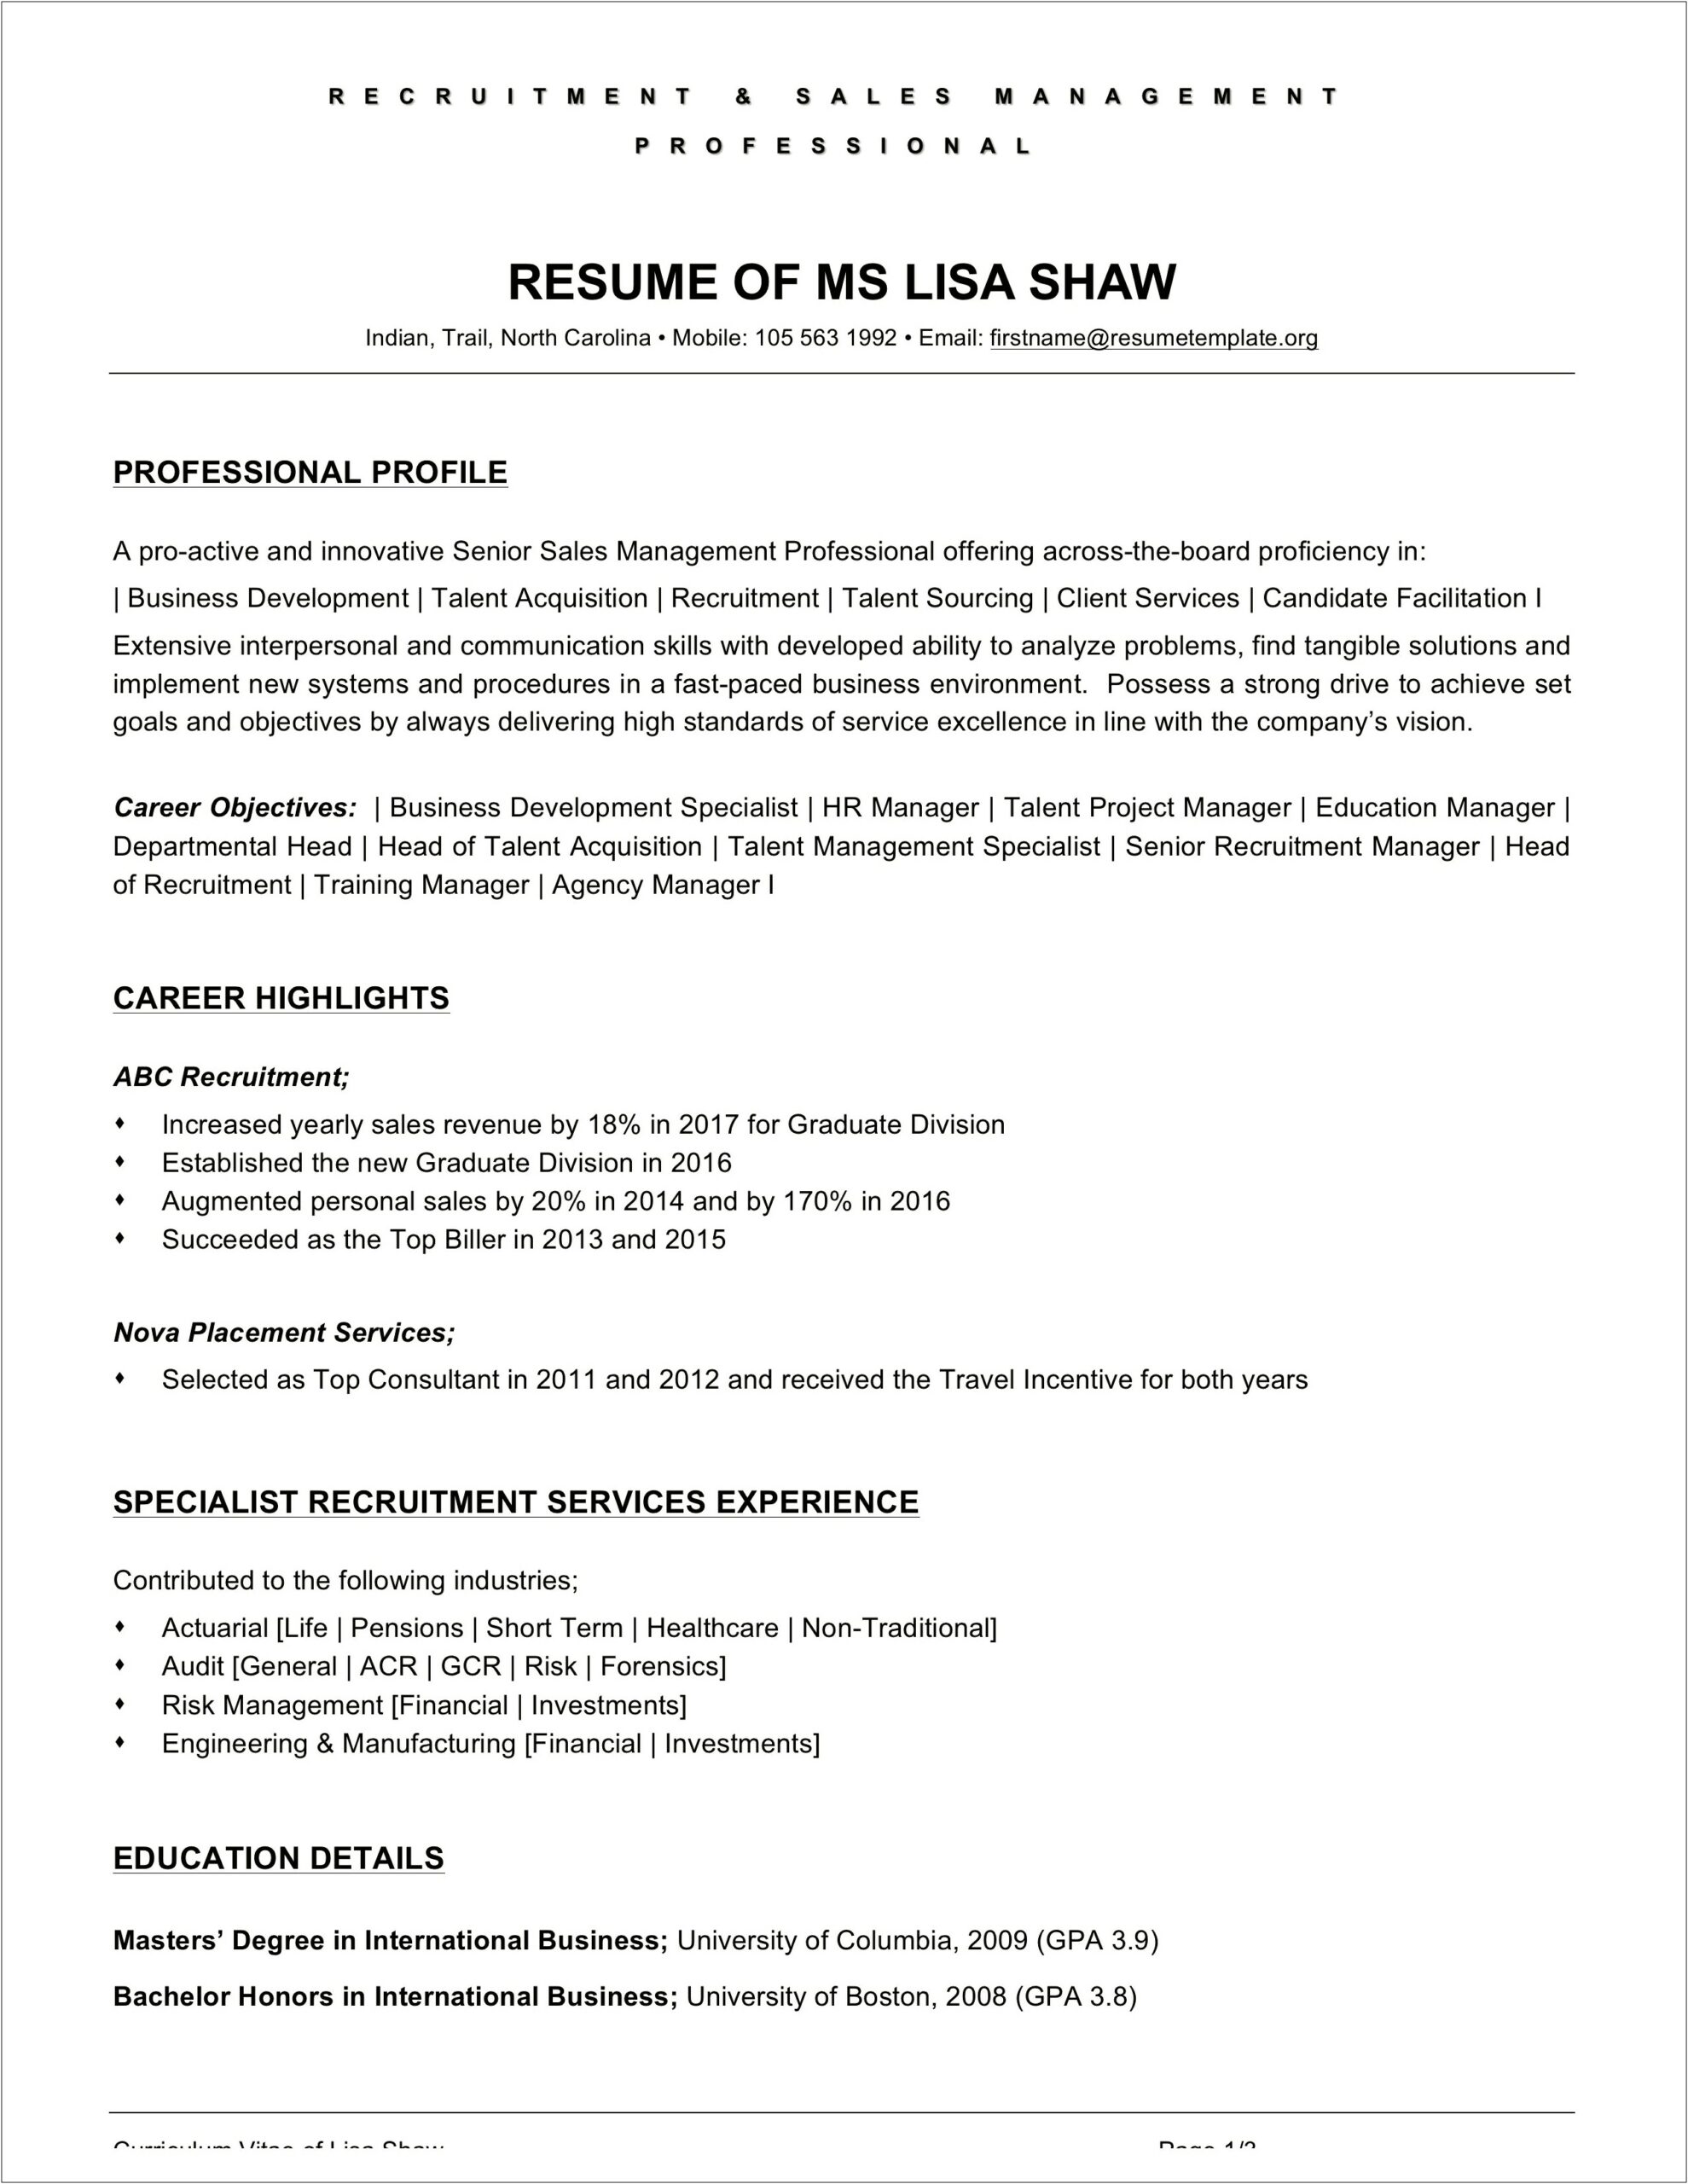 Word Resume Template Has Unmoveable Line On It